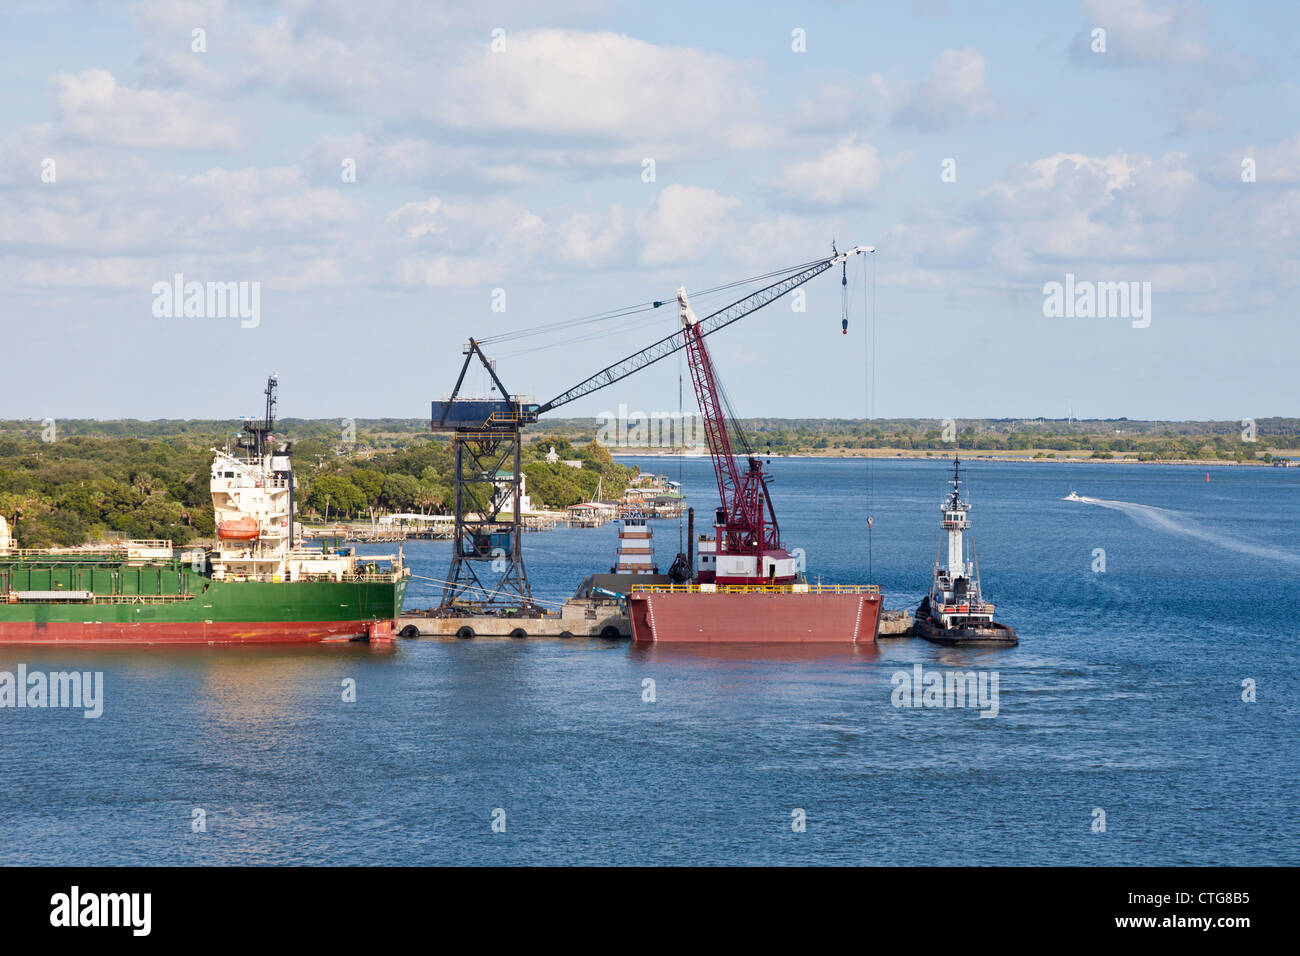 Bitu Mountain, tug boats and a crane barge docked in the St. Johns River In Jacksonville, Florida, USA Stock Photo